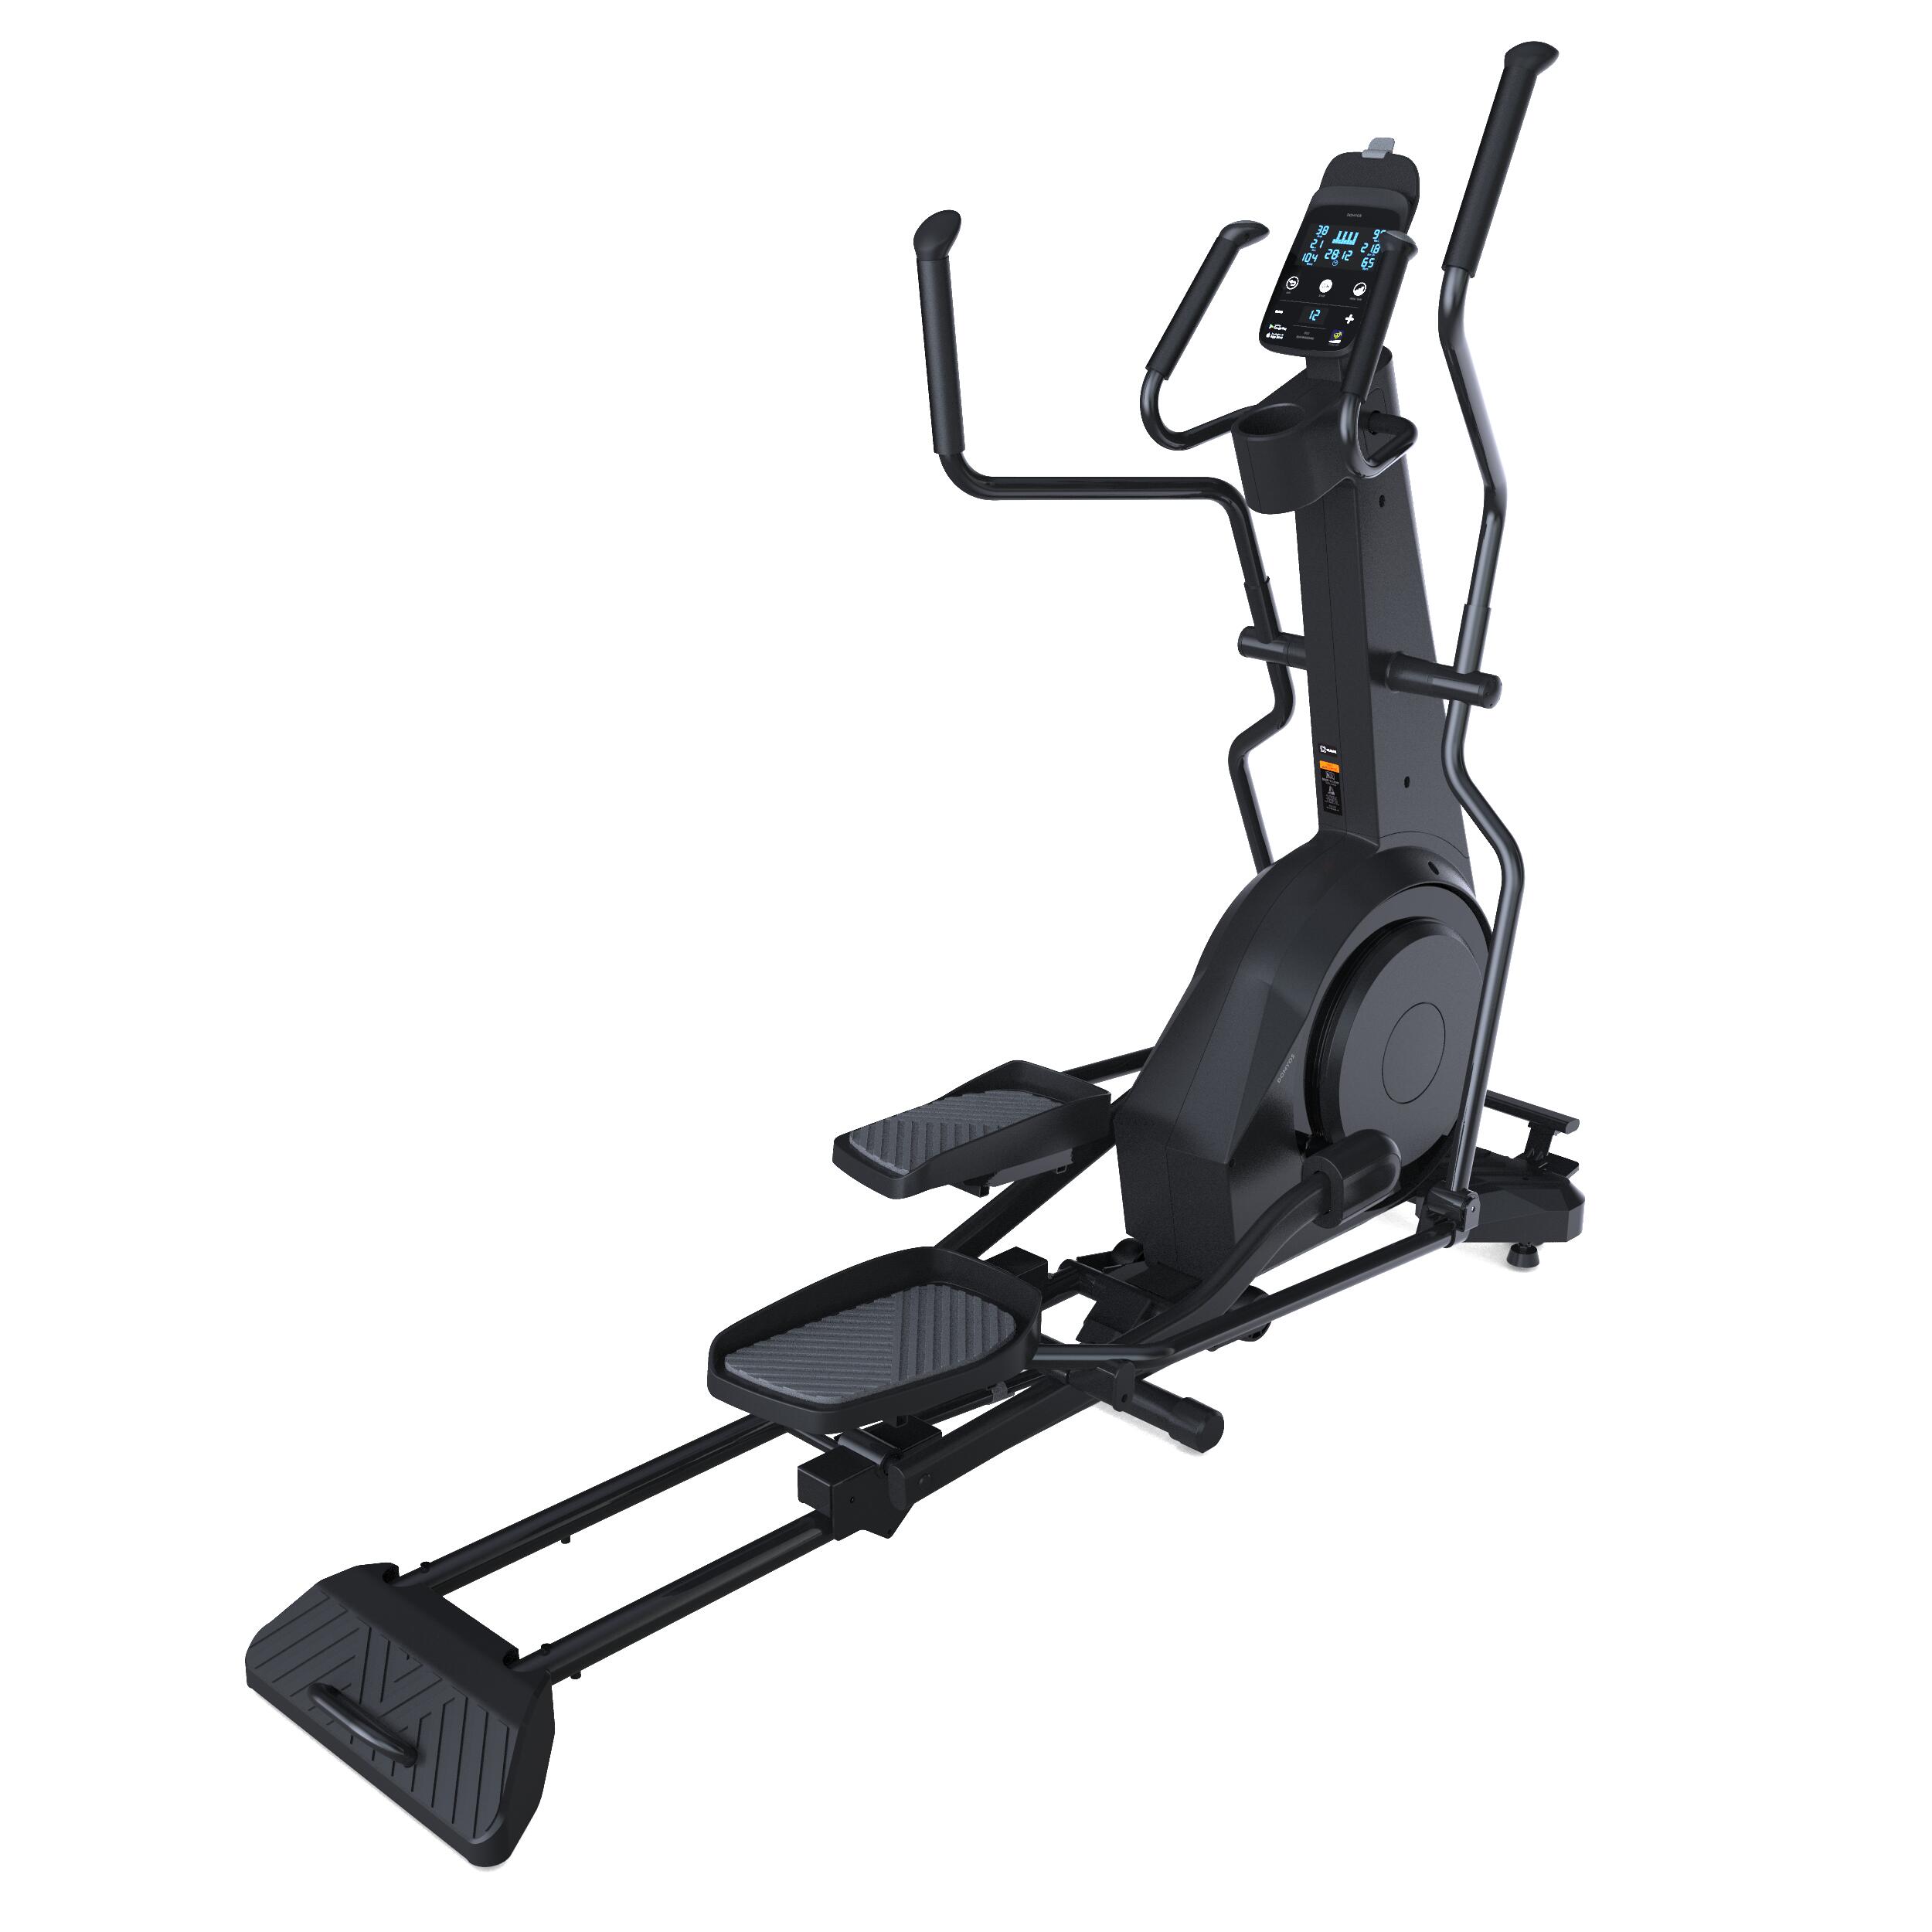 Front Wheel Folding Connected Self-Powered Cross Trainer Challenge Elliptical 1/6